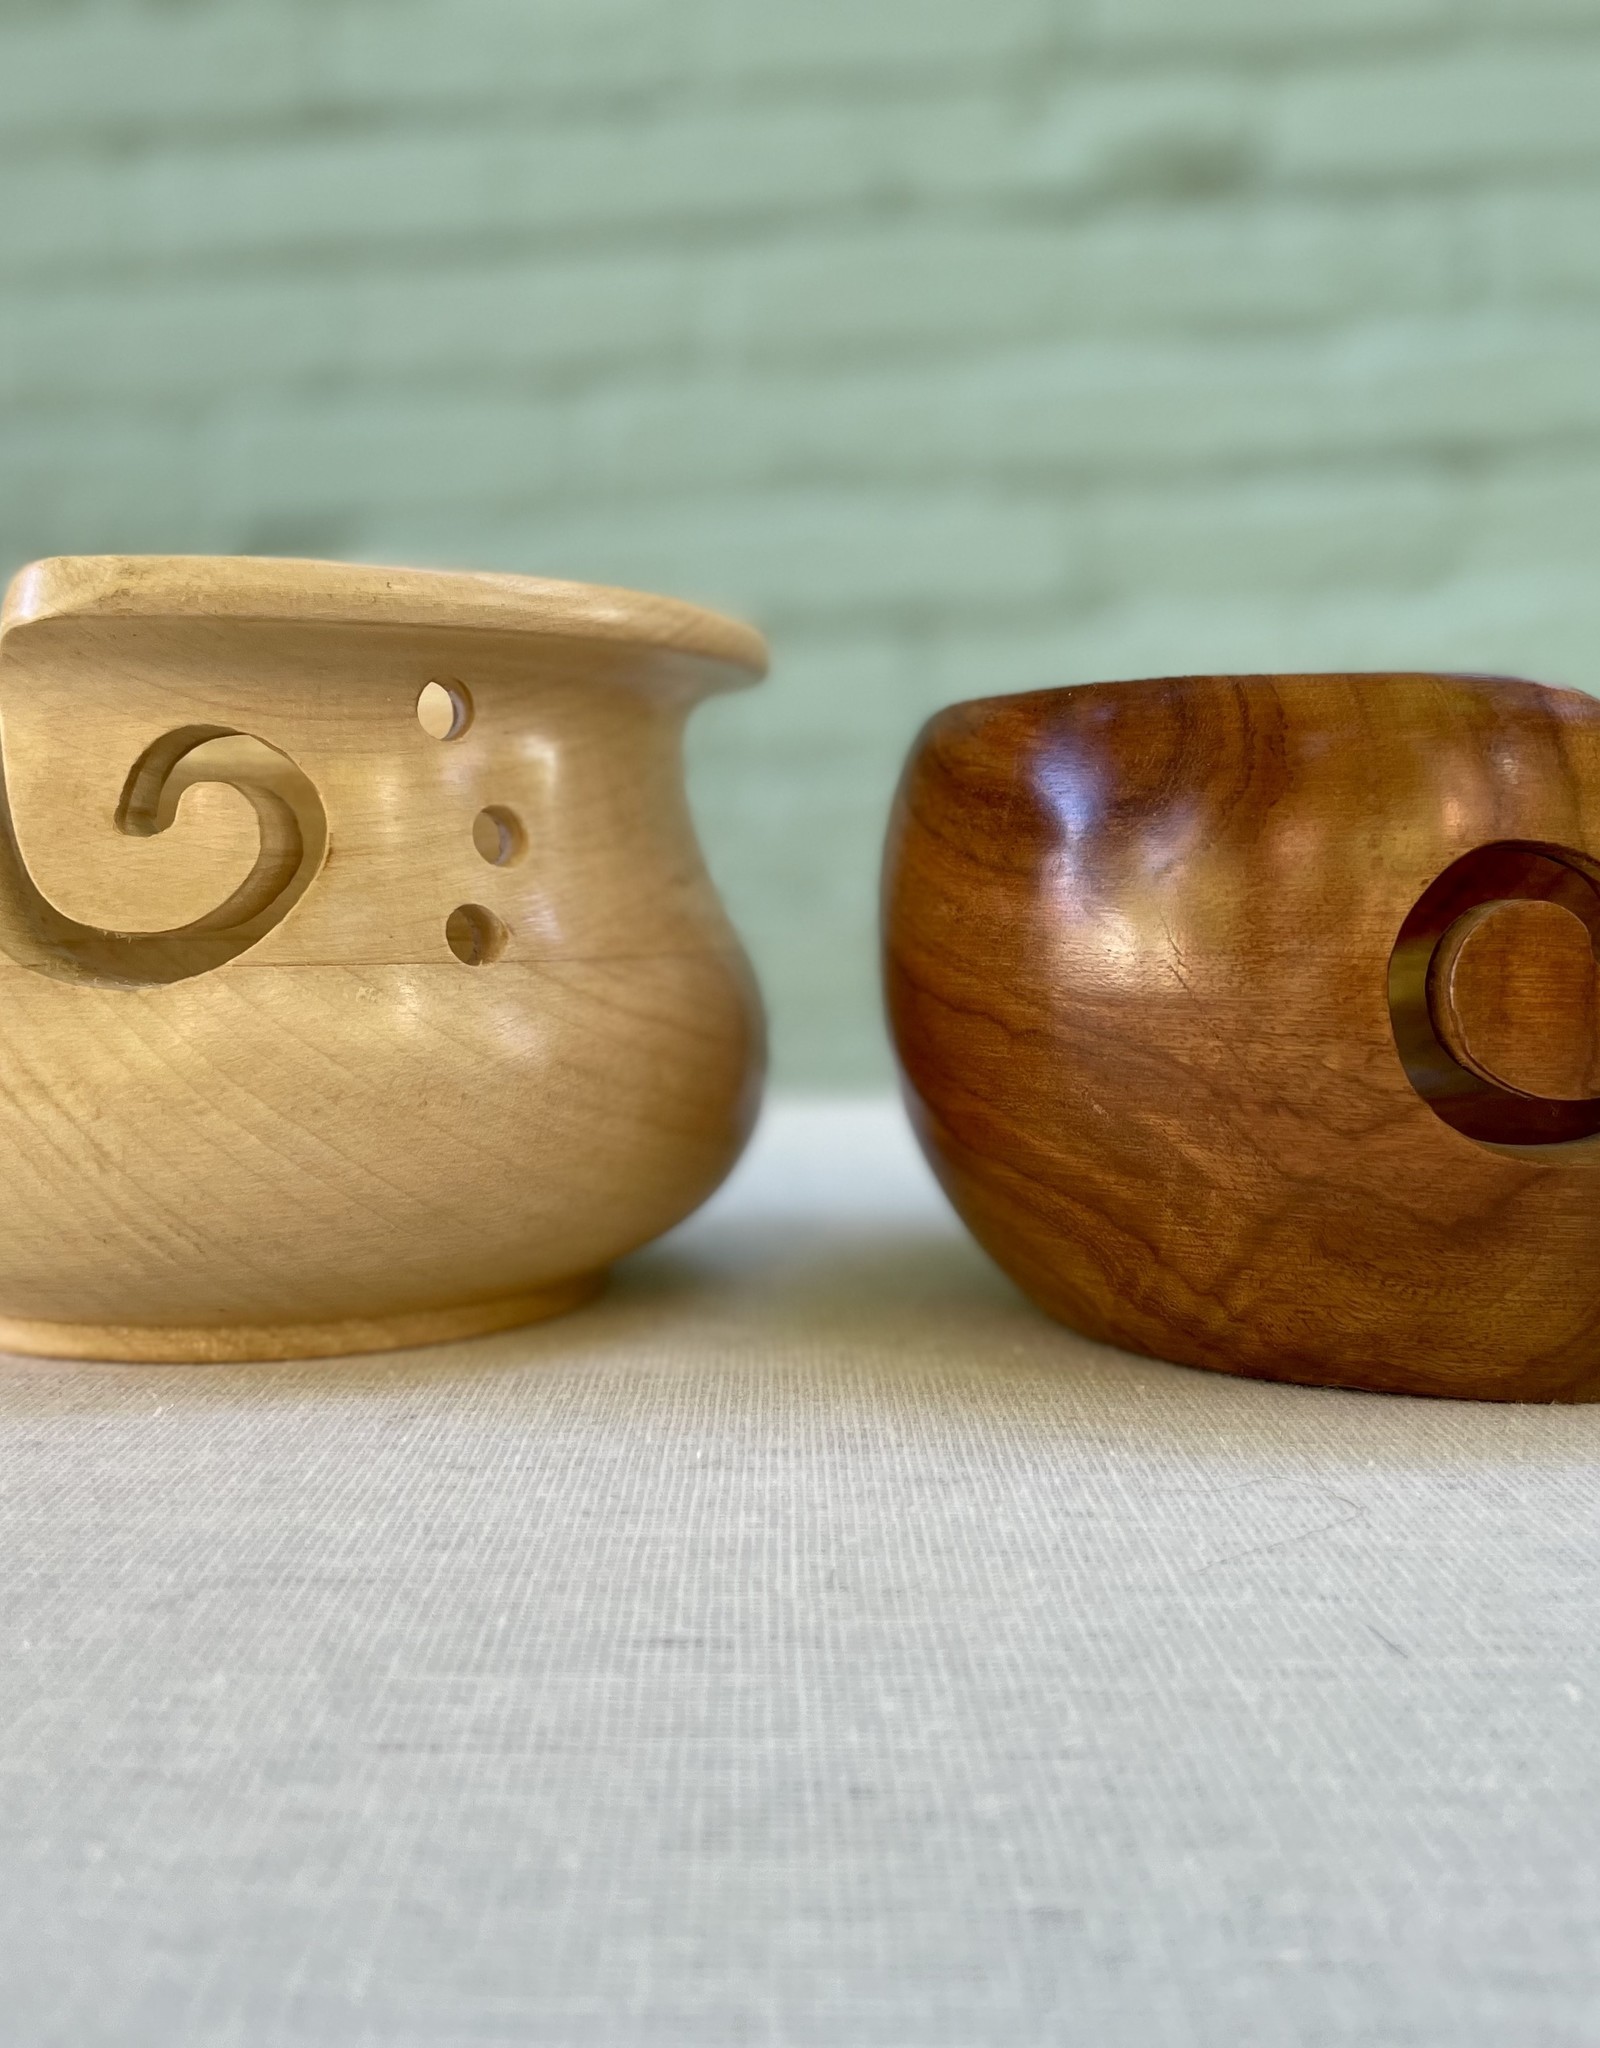 Indian Rosewood Yarn Bowl by Purple Heart